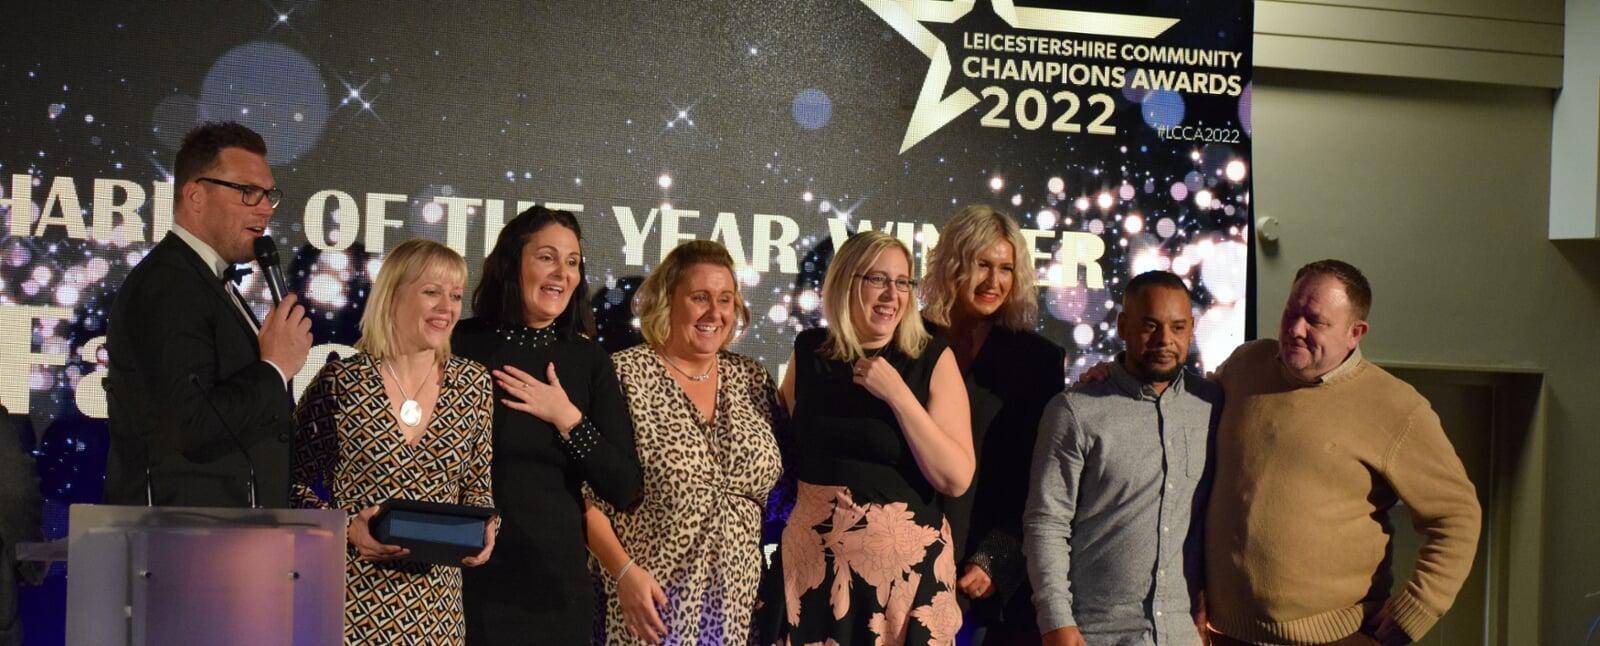 Community Champions Recognised and £5000 handed out at Leicestershire Awards Evening 